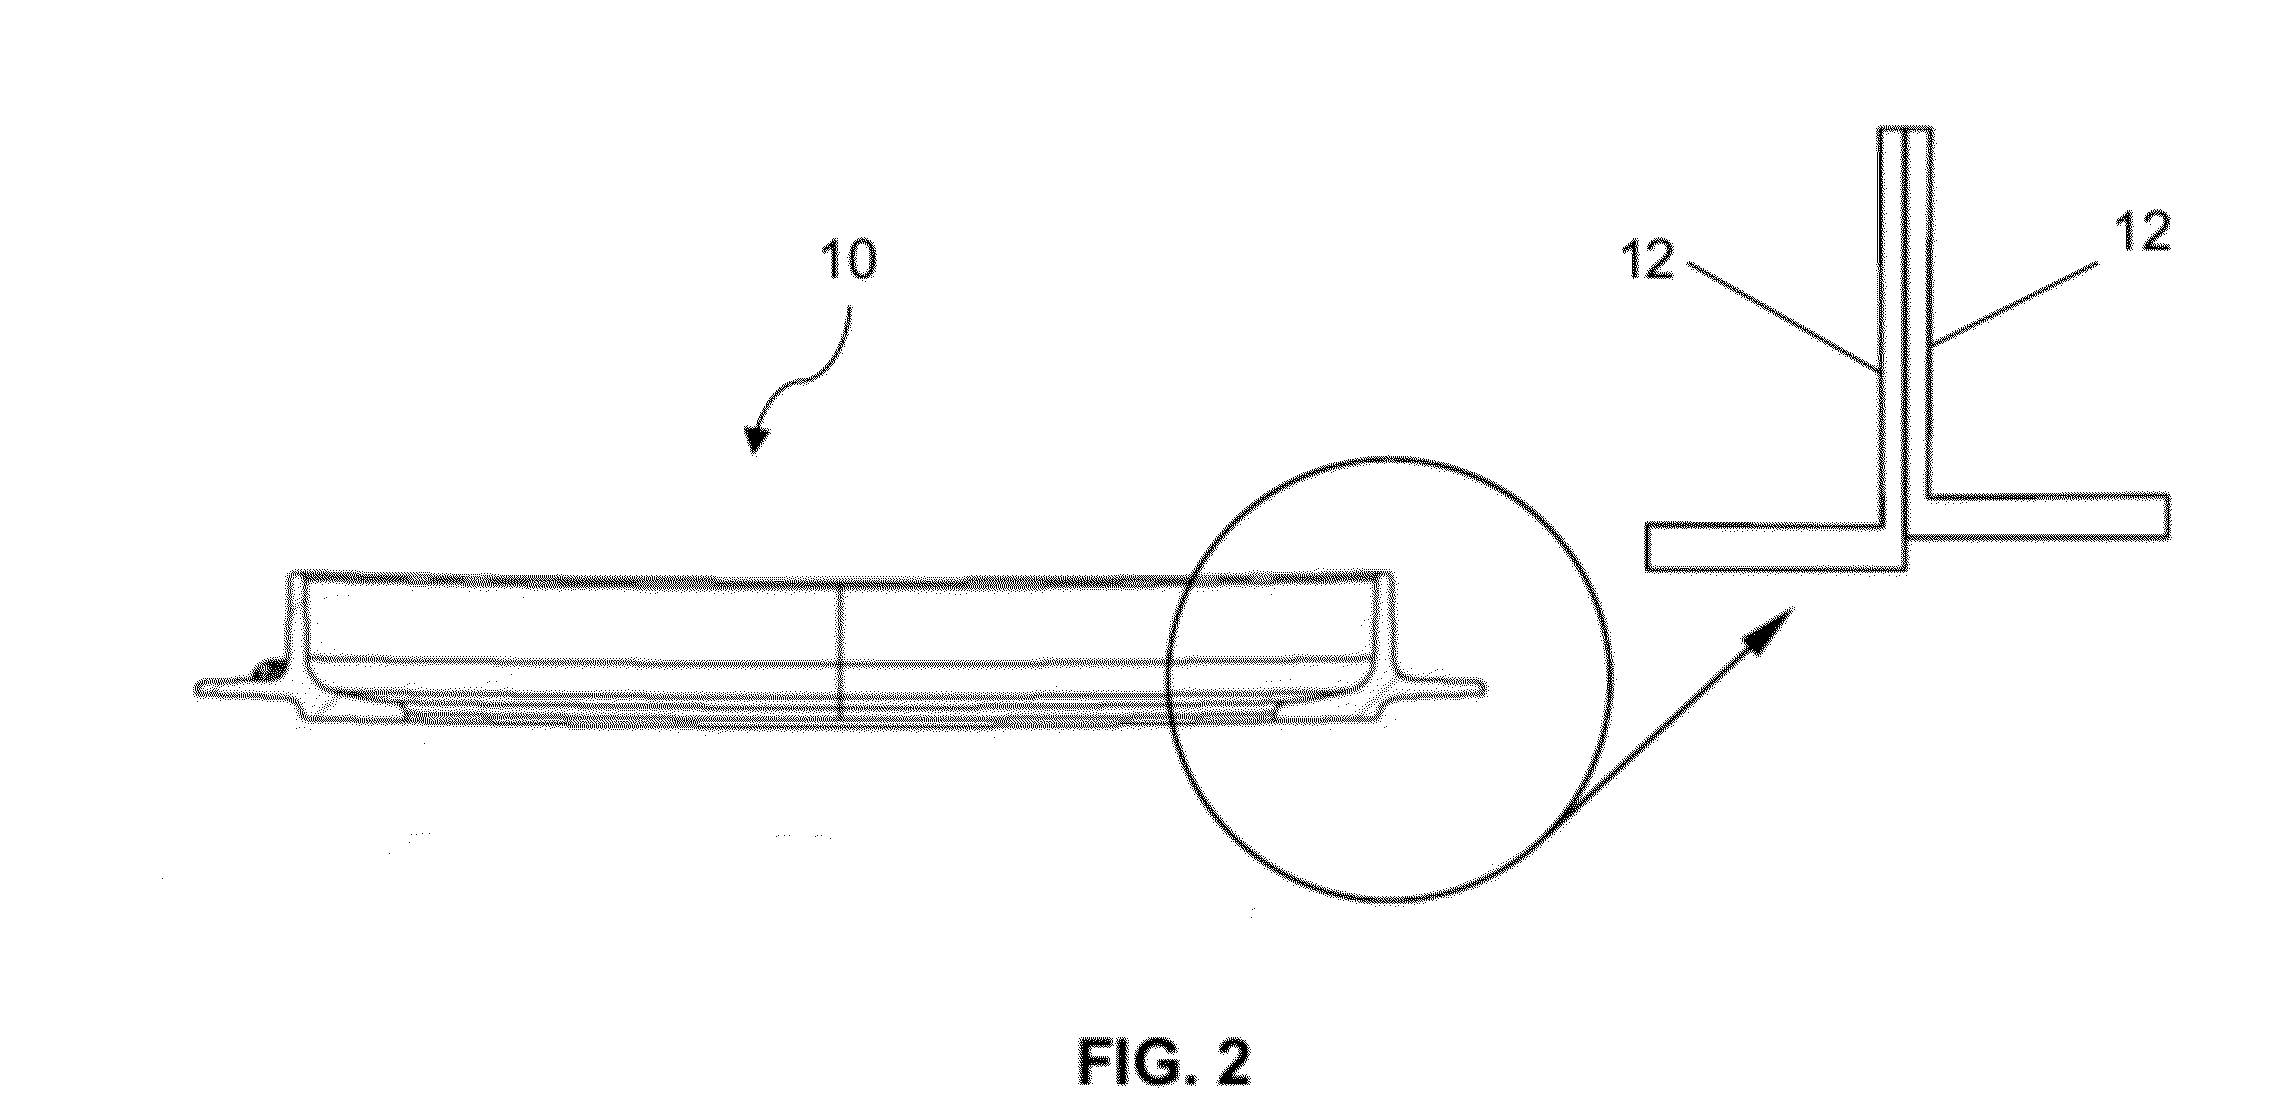 Woven preforms, fiber reinforced composites, and methods of making thereof